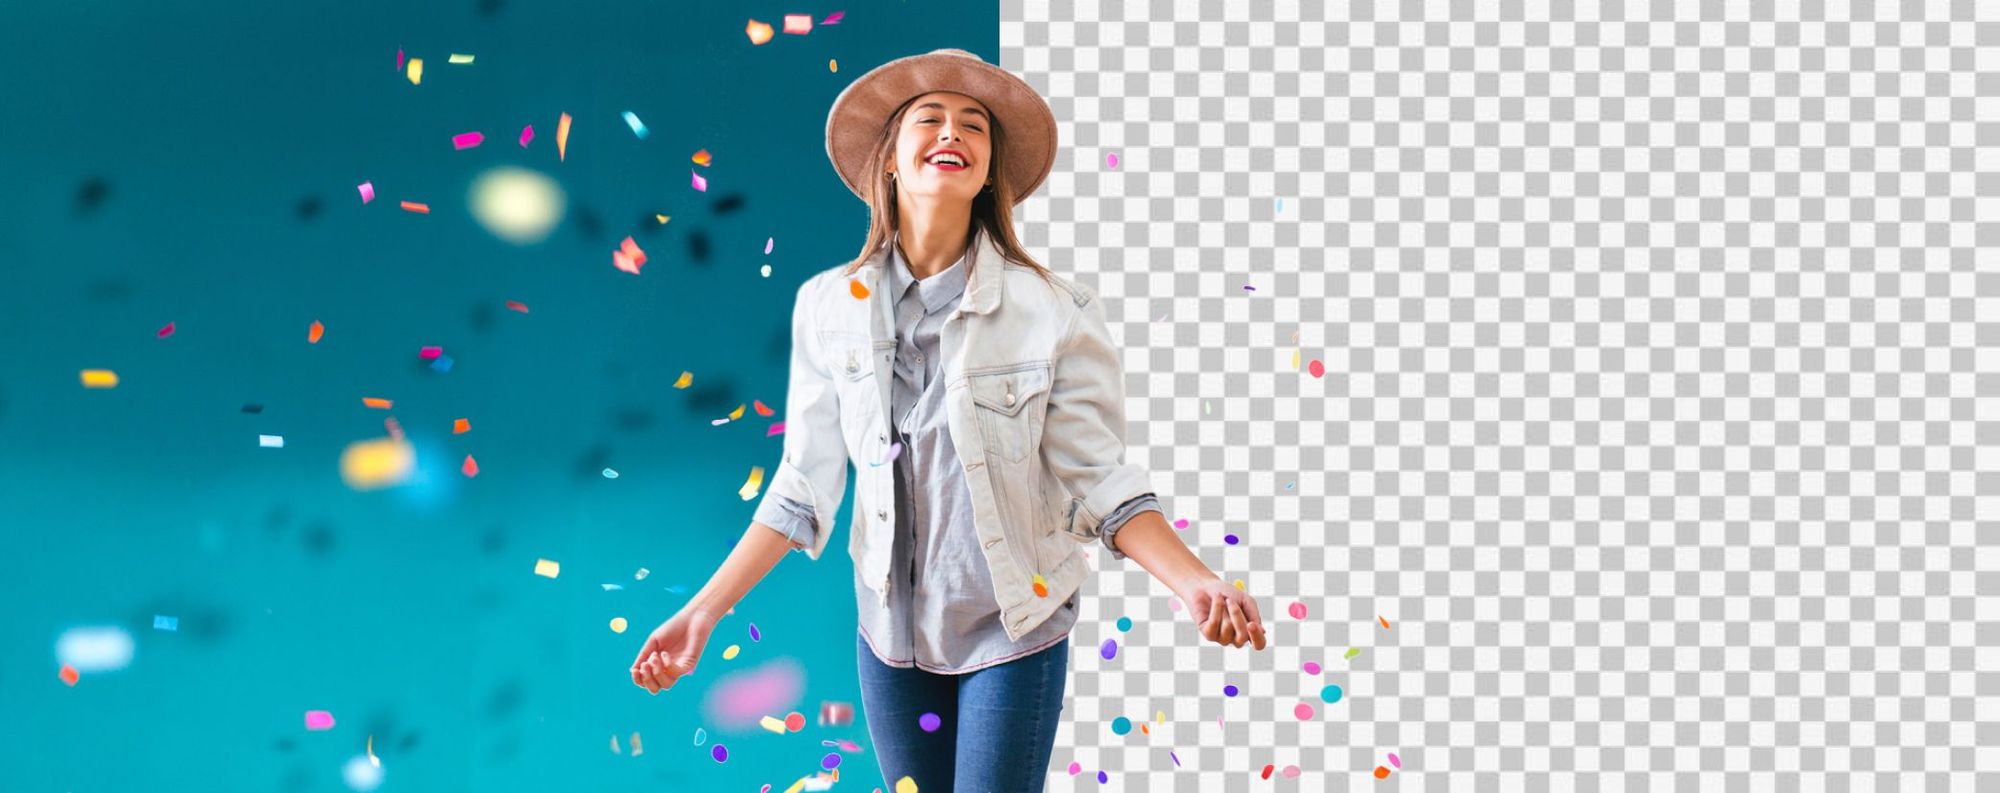 How to Remove Background from a Picture